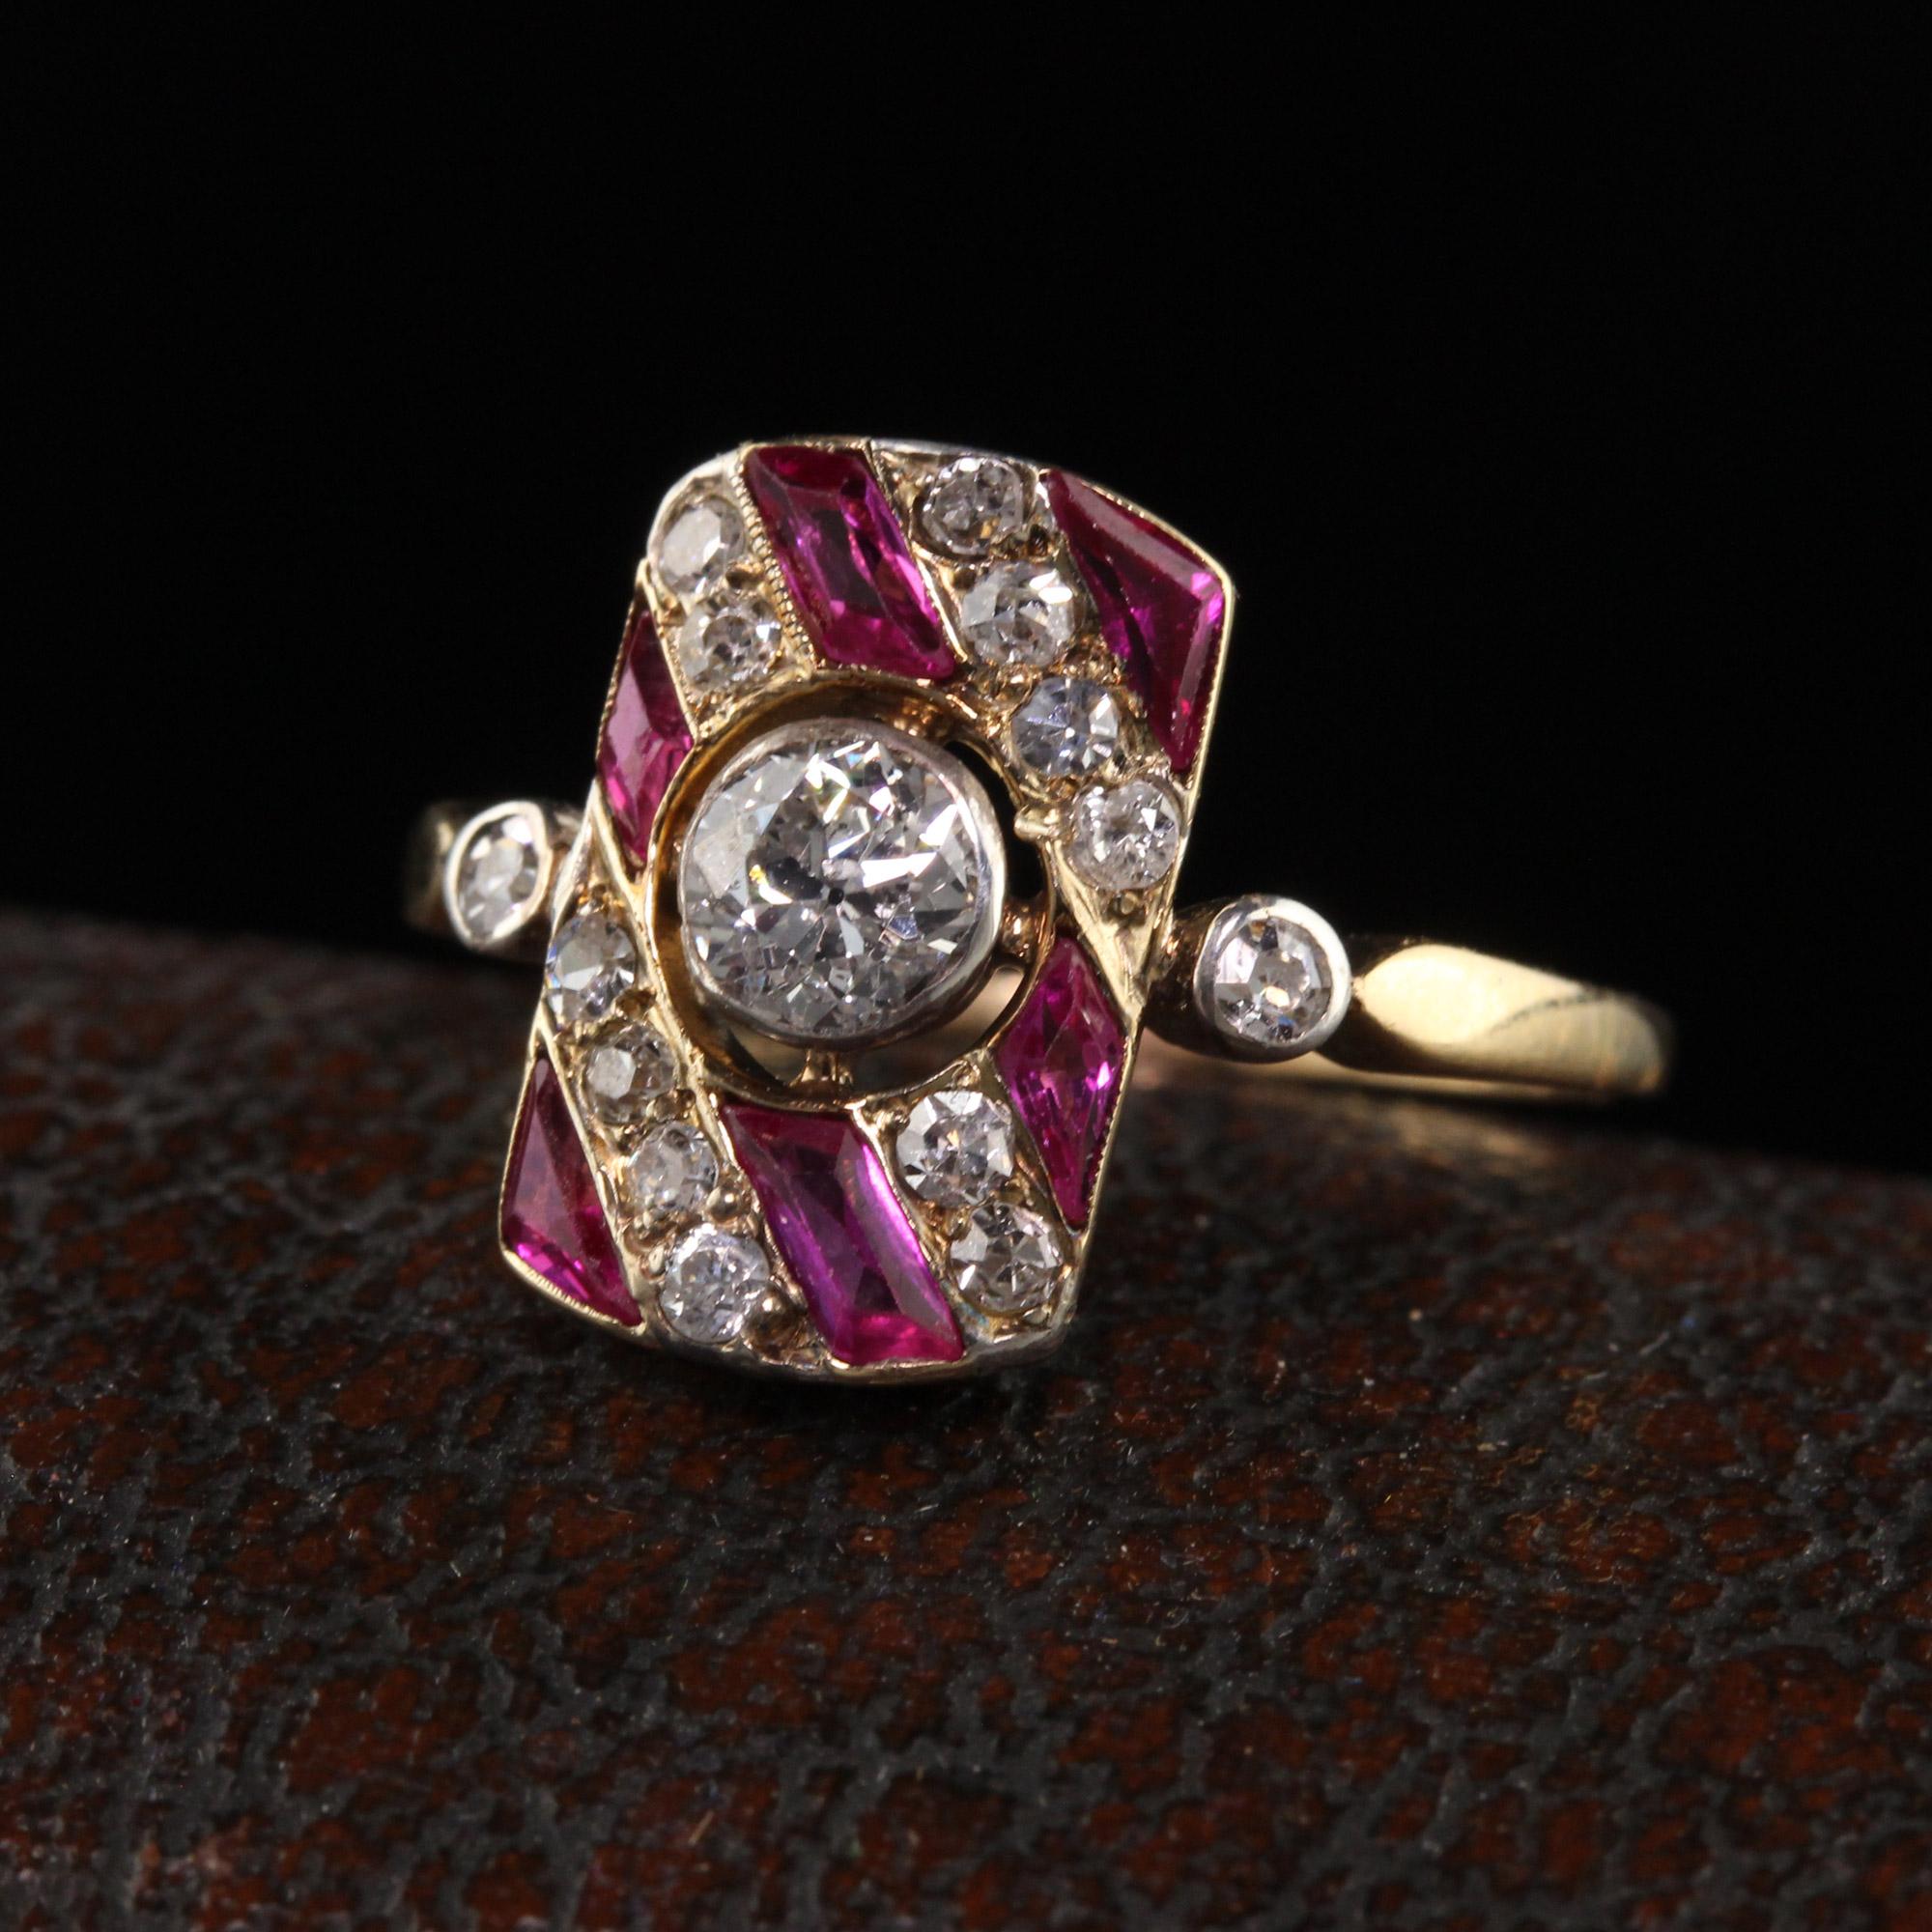 Beautiful Antique Edwardian 14K Yellow Gold Old Mine Diamond and Ruby Ring. This gorgeous ring is crafted in 14k yellow gold. The is has old mine cut diamonds on it with synthetic rubies which were very much common at the time.

Item #R1370

Metal: